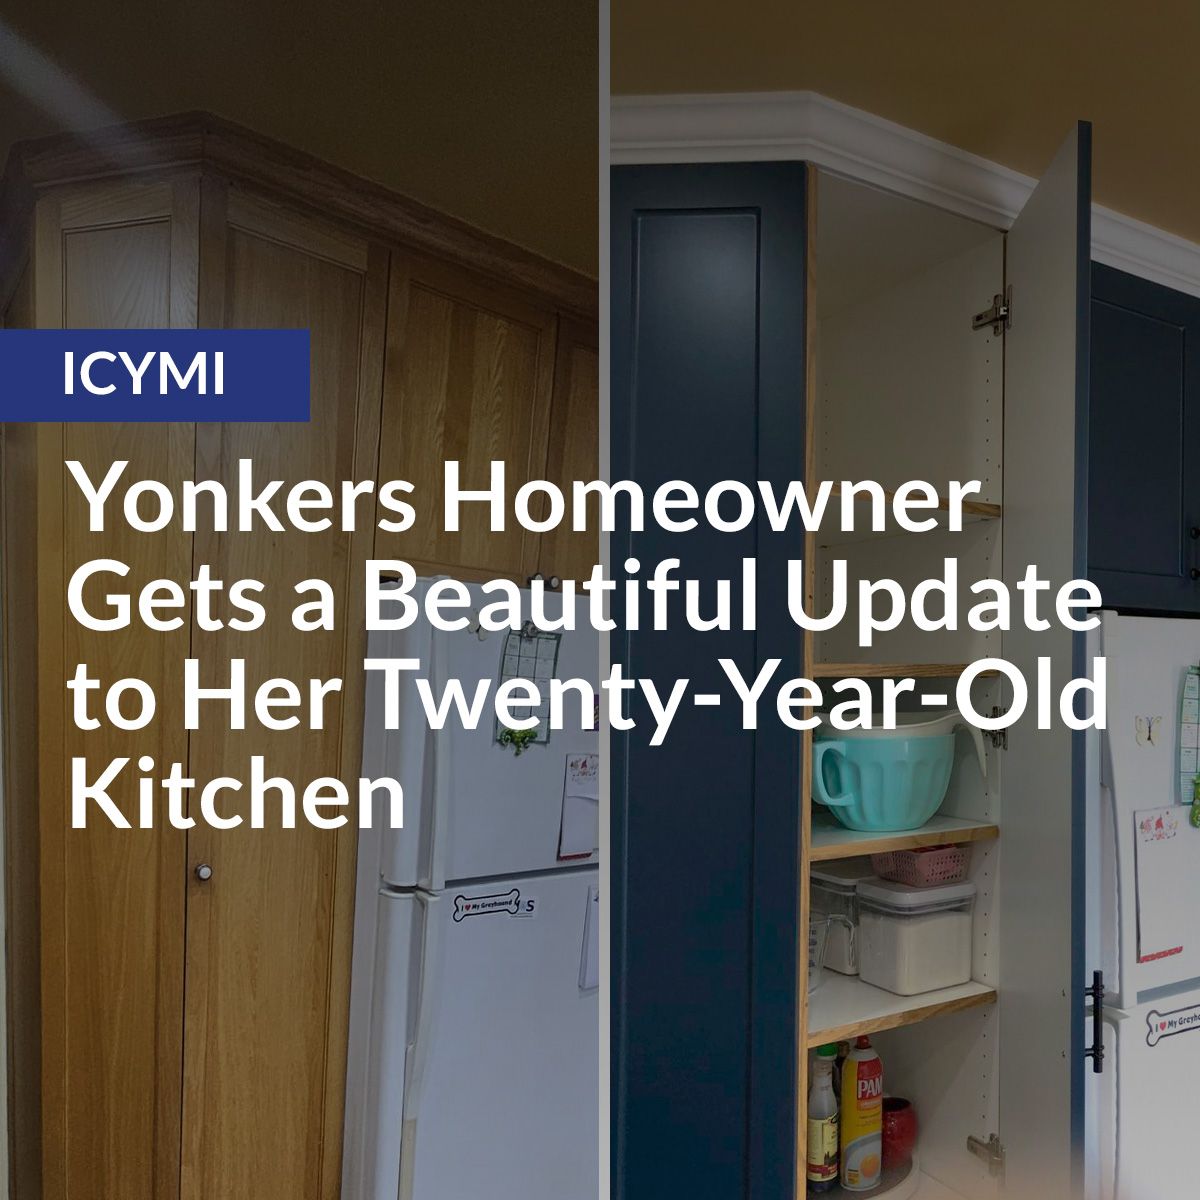 Yonkers Homeowner Gets a Beautiful Update to Her Twenty-Year-Old Kitchen